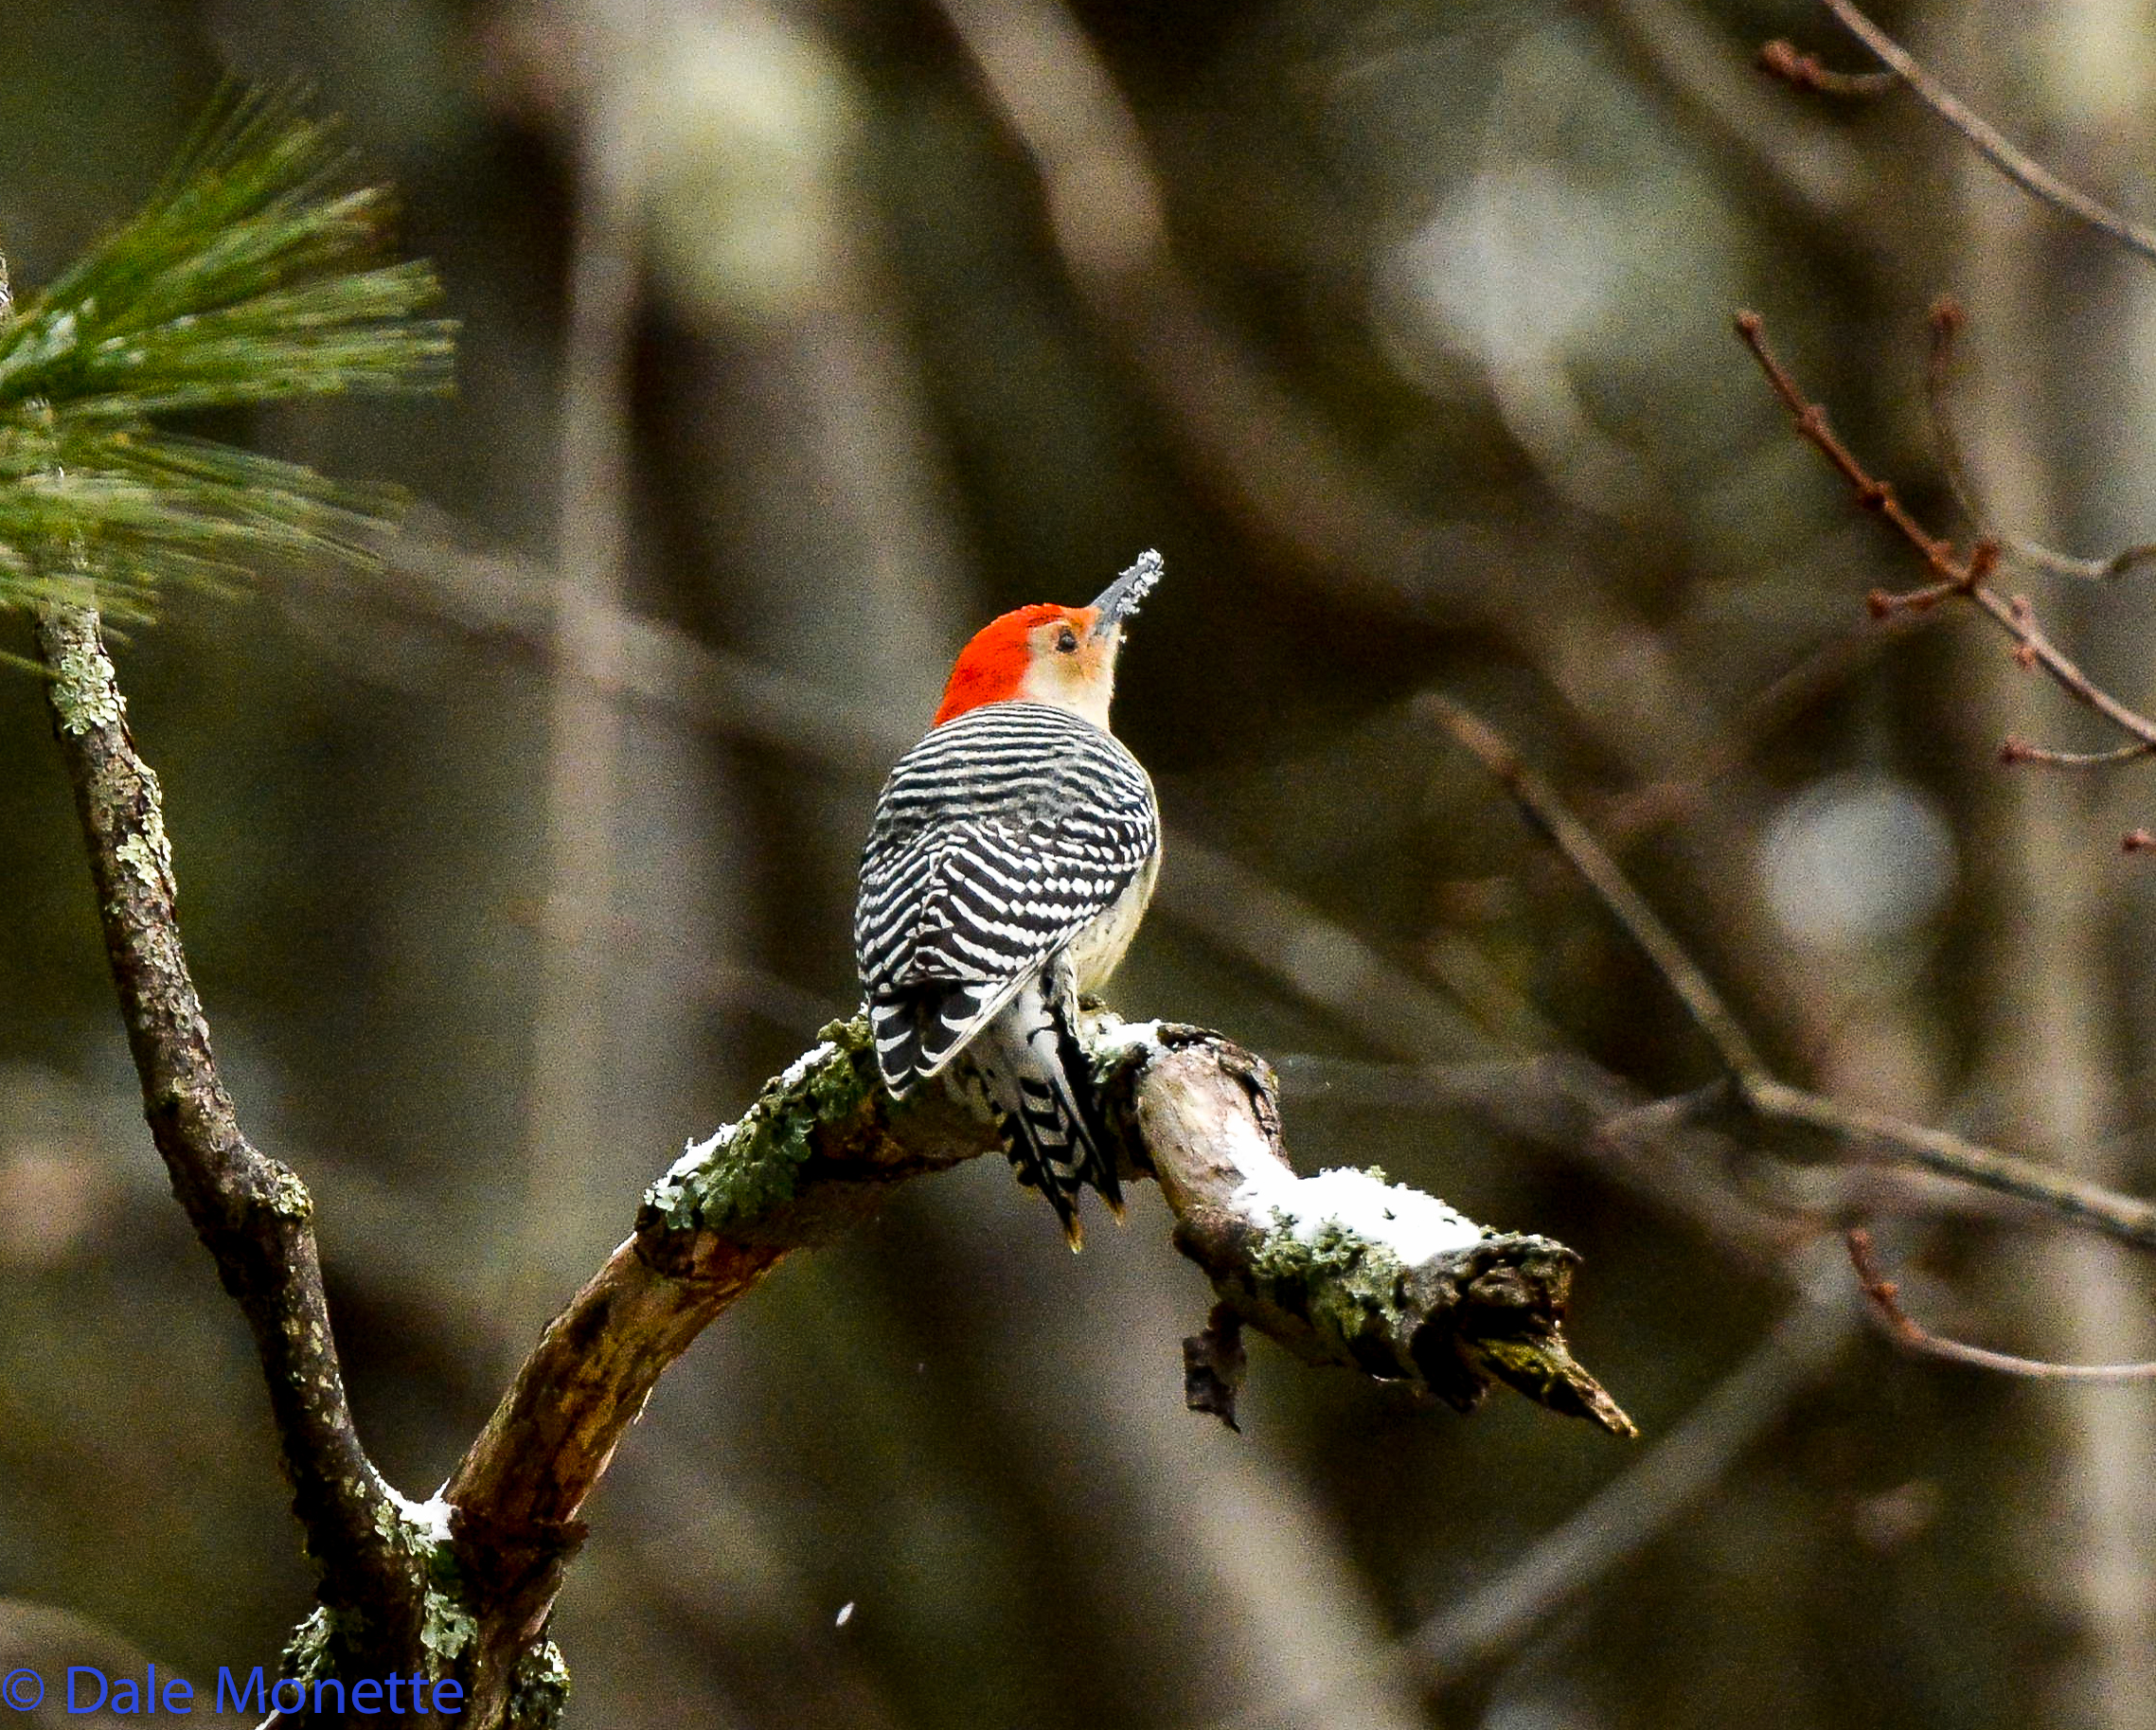   Red bellied woodpeckers are becoming more and more common in New England and can be seen at Quabbin.  